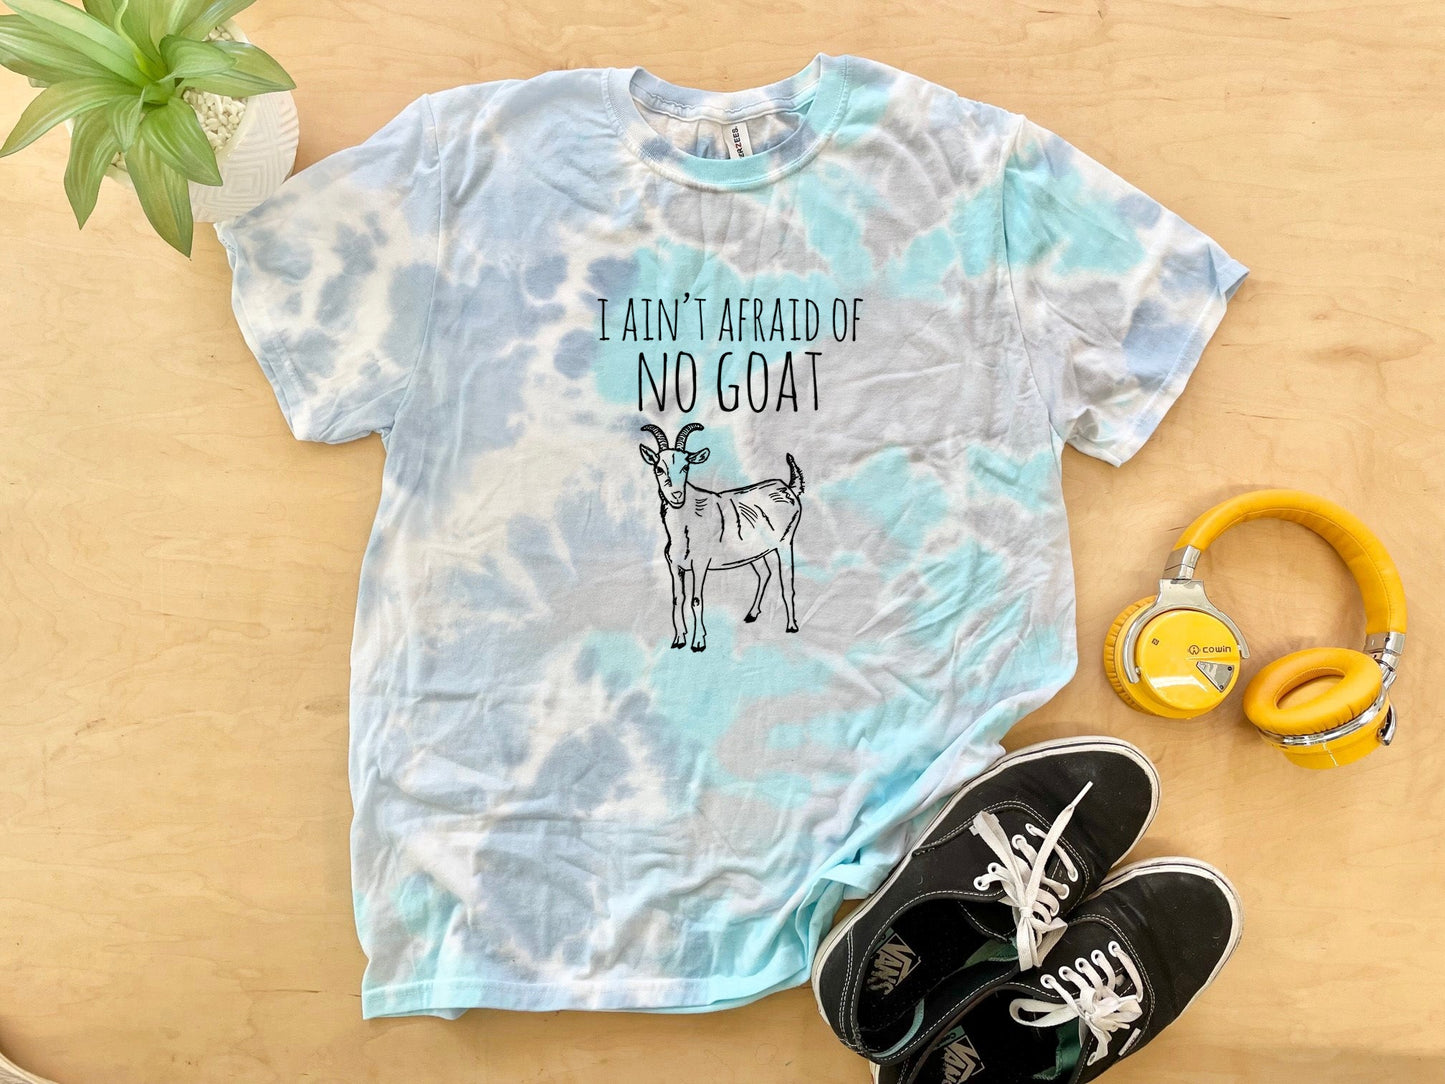 My Ideal Summer Body Is One I Have Complete Control Over - Mens/Unisex Tie Dye Tee - Blue